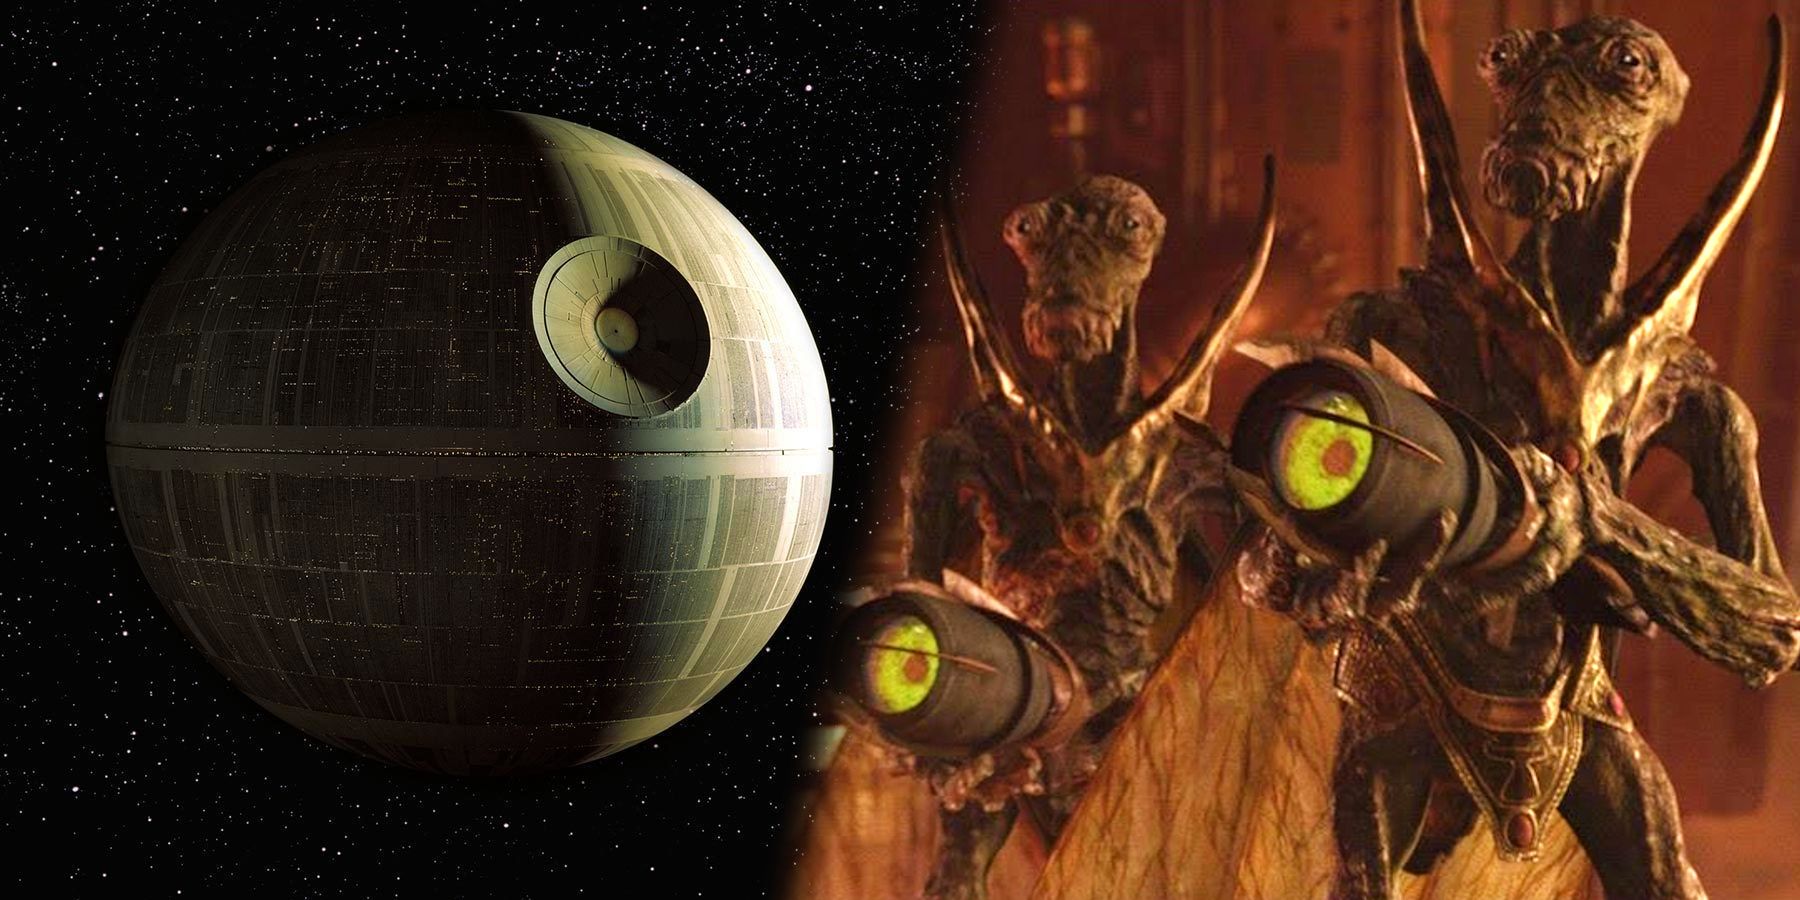 The Death Star from Star Wars and two Geonosian aliens holding blasters